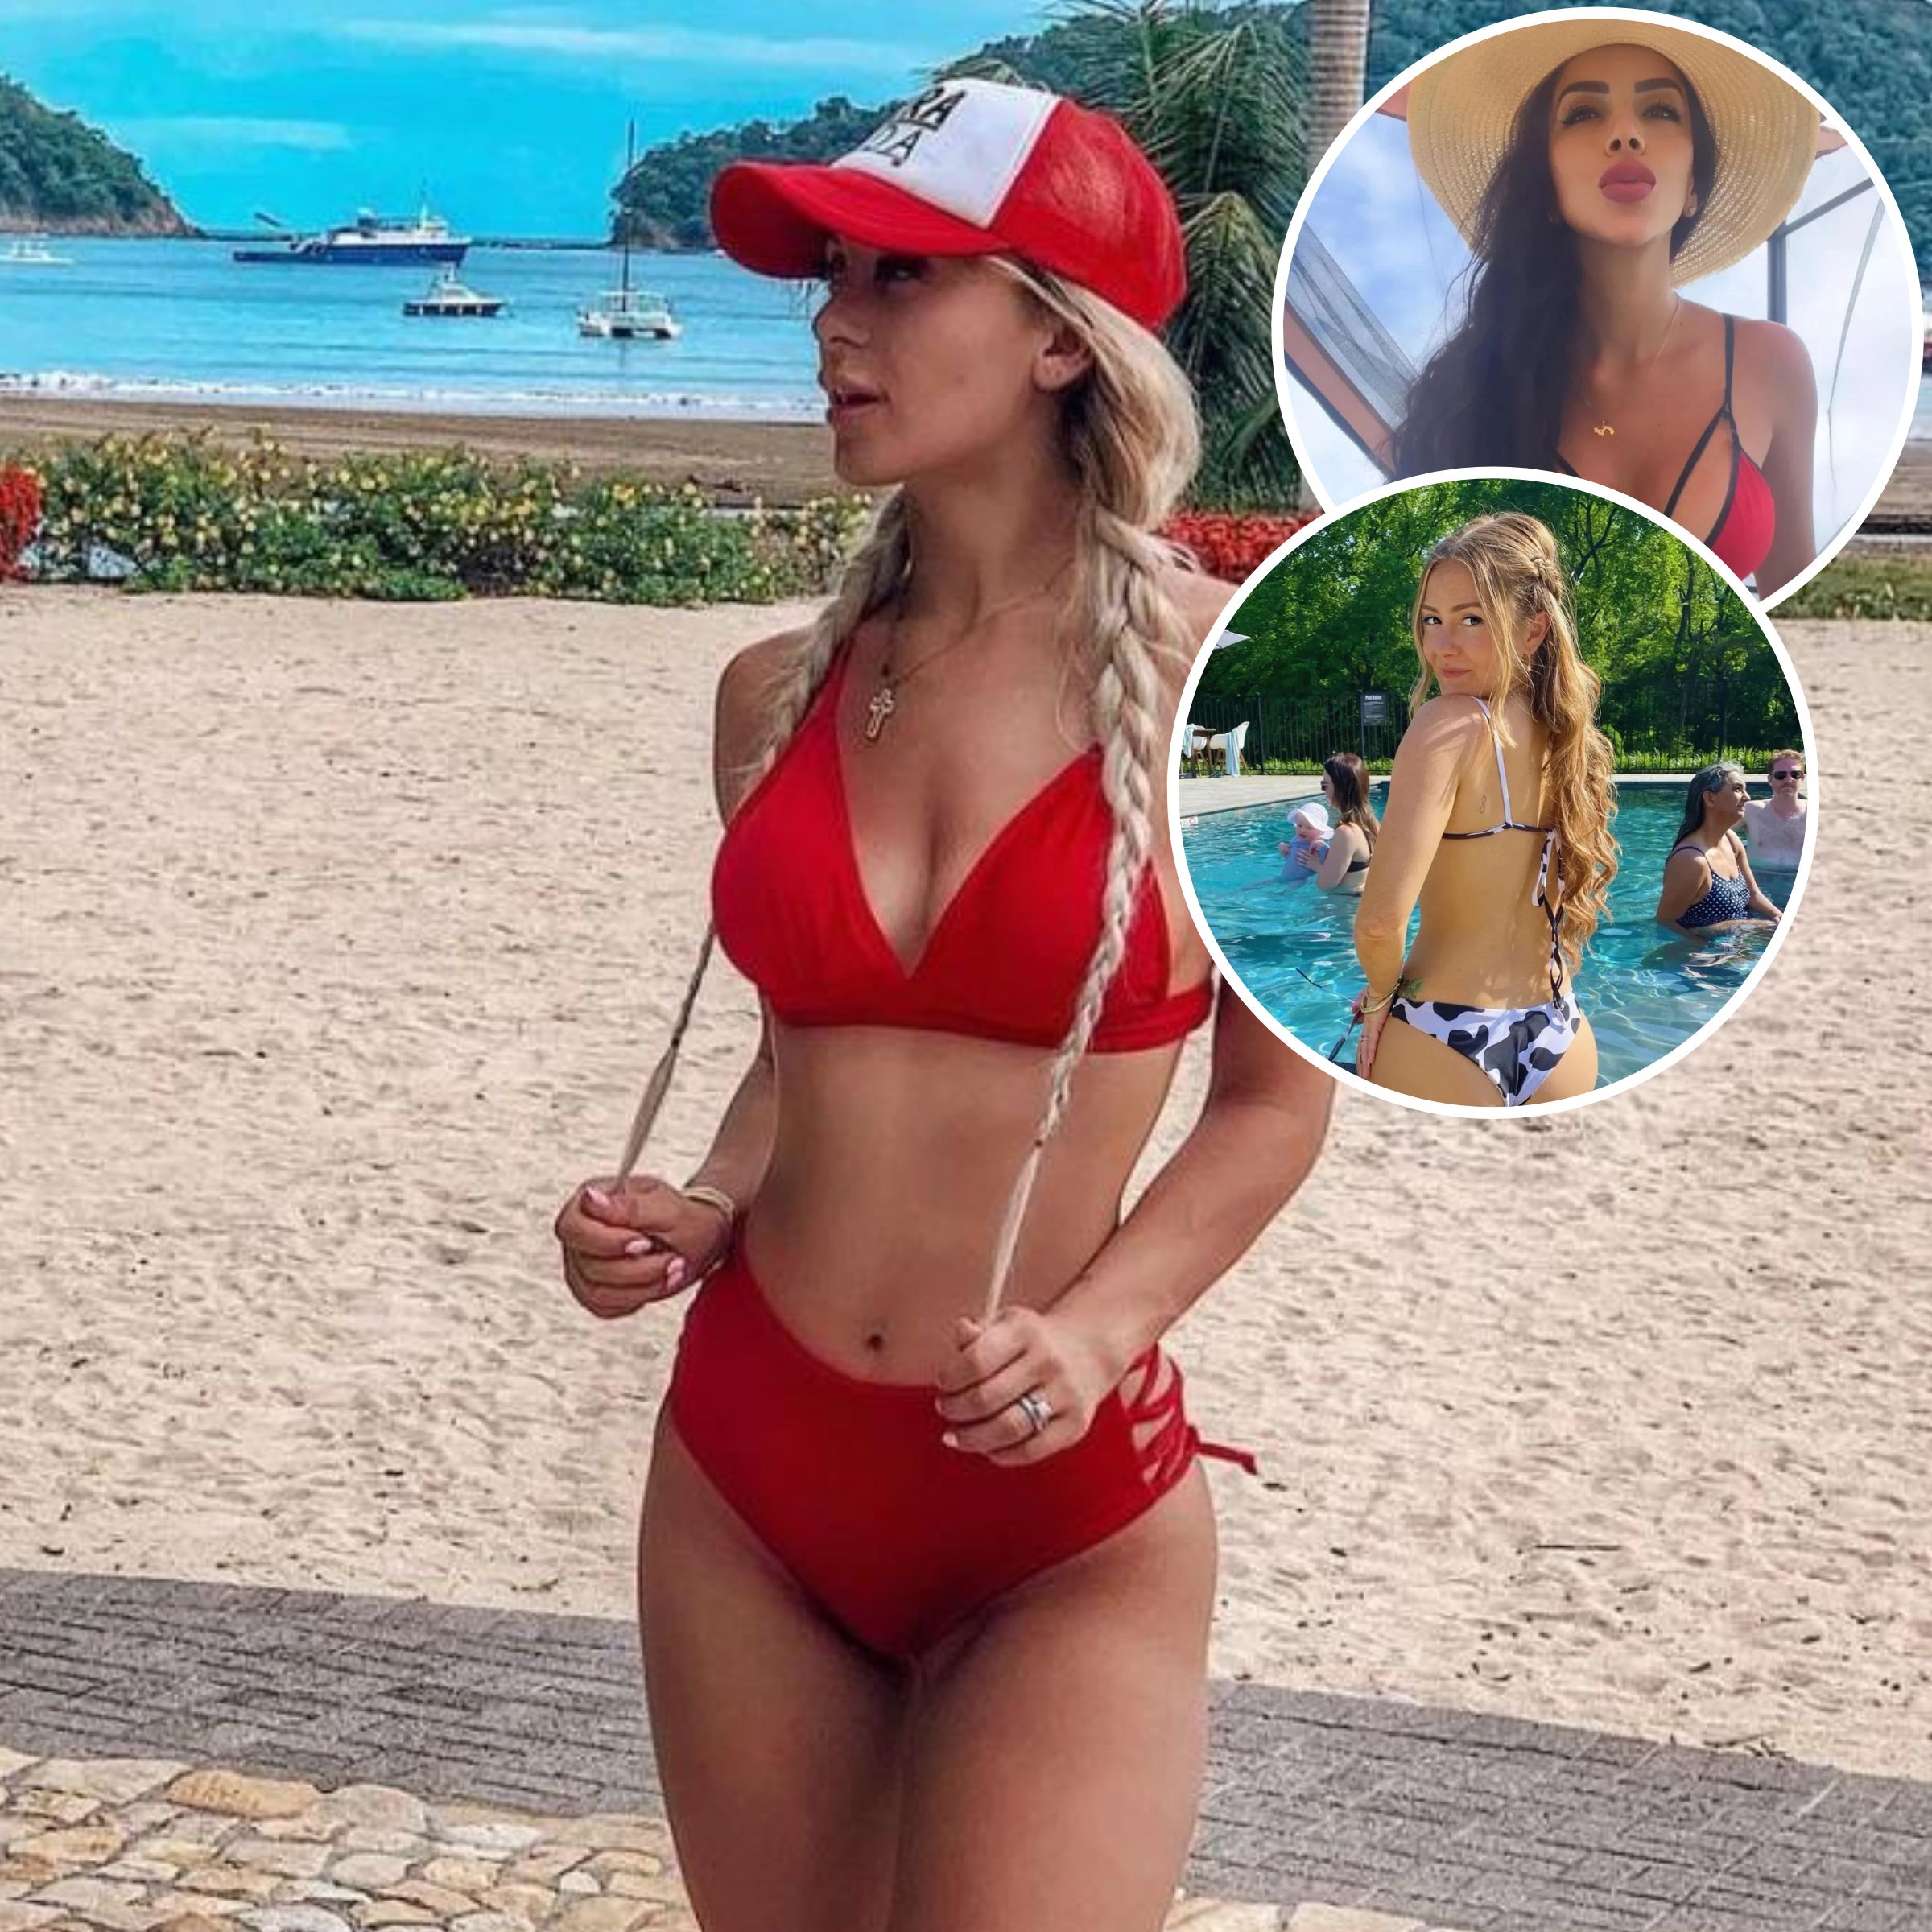 Petite Brunette Teens Showing - 90 Day Fiance' Bikini Photos: See the Stars Rocking Sexy Swimsuits